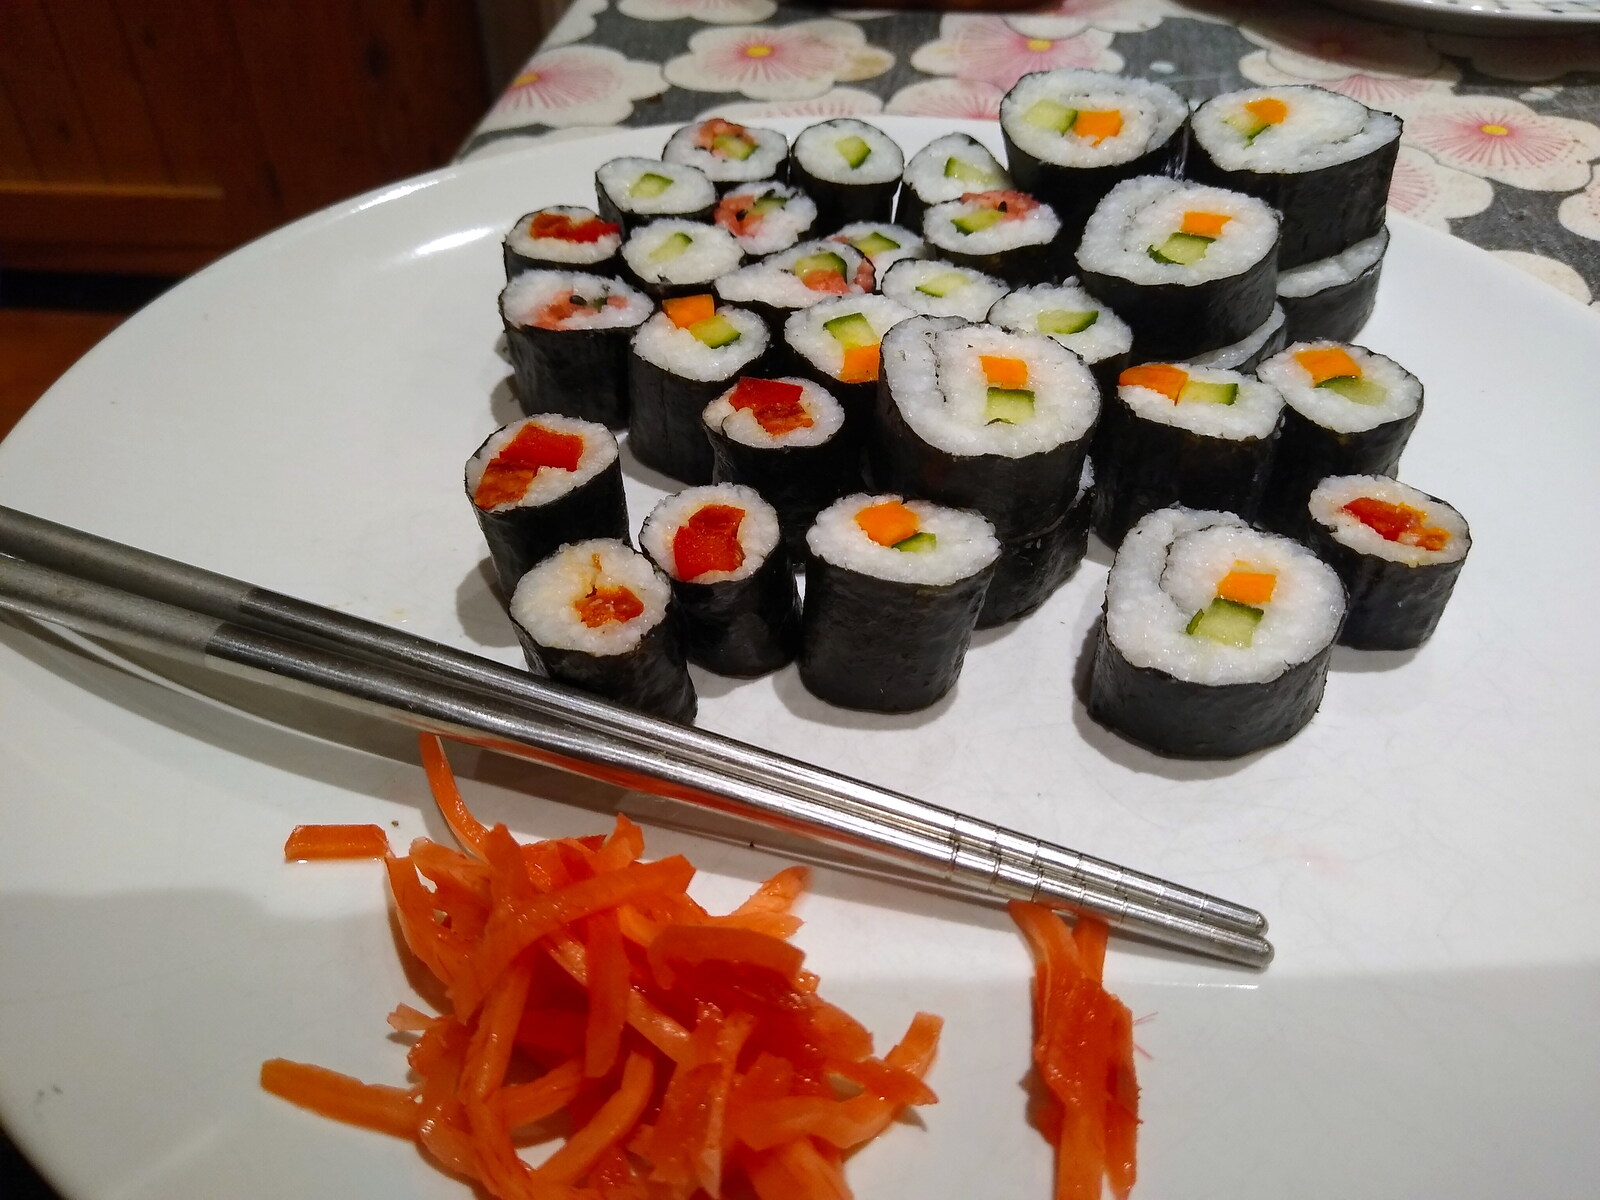 The Detectorists, and a Trip to the Market, Norwich - 25th February 2023: Fred's latest batch of home-made sushi